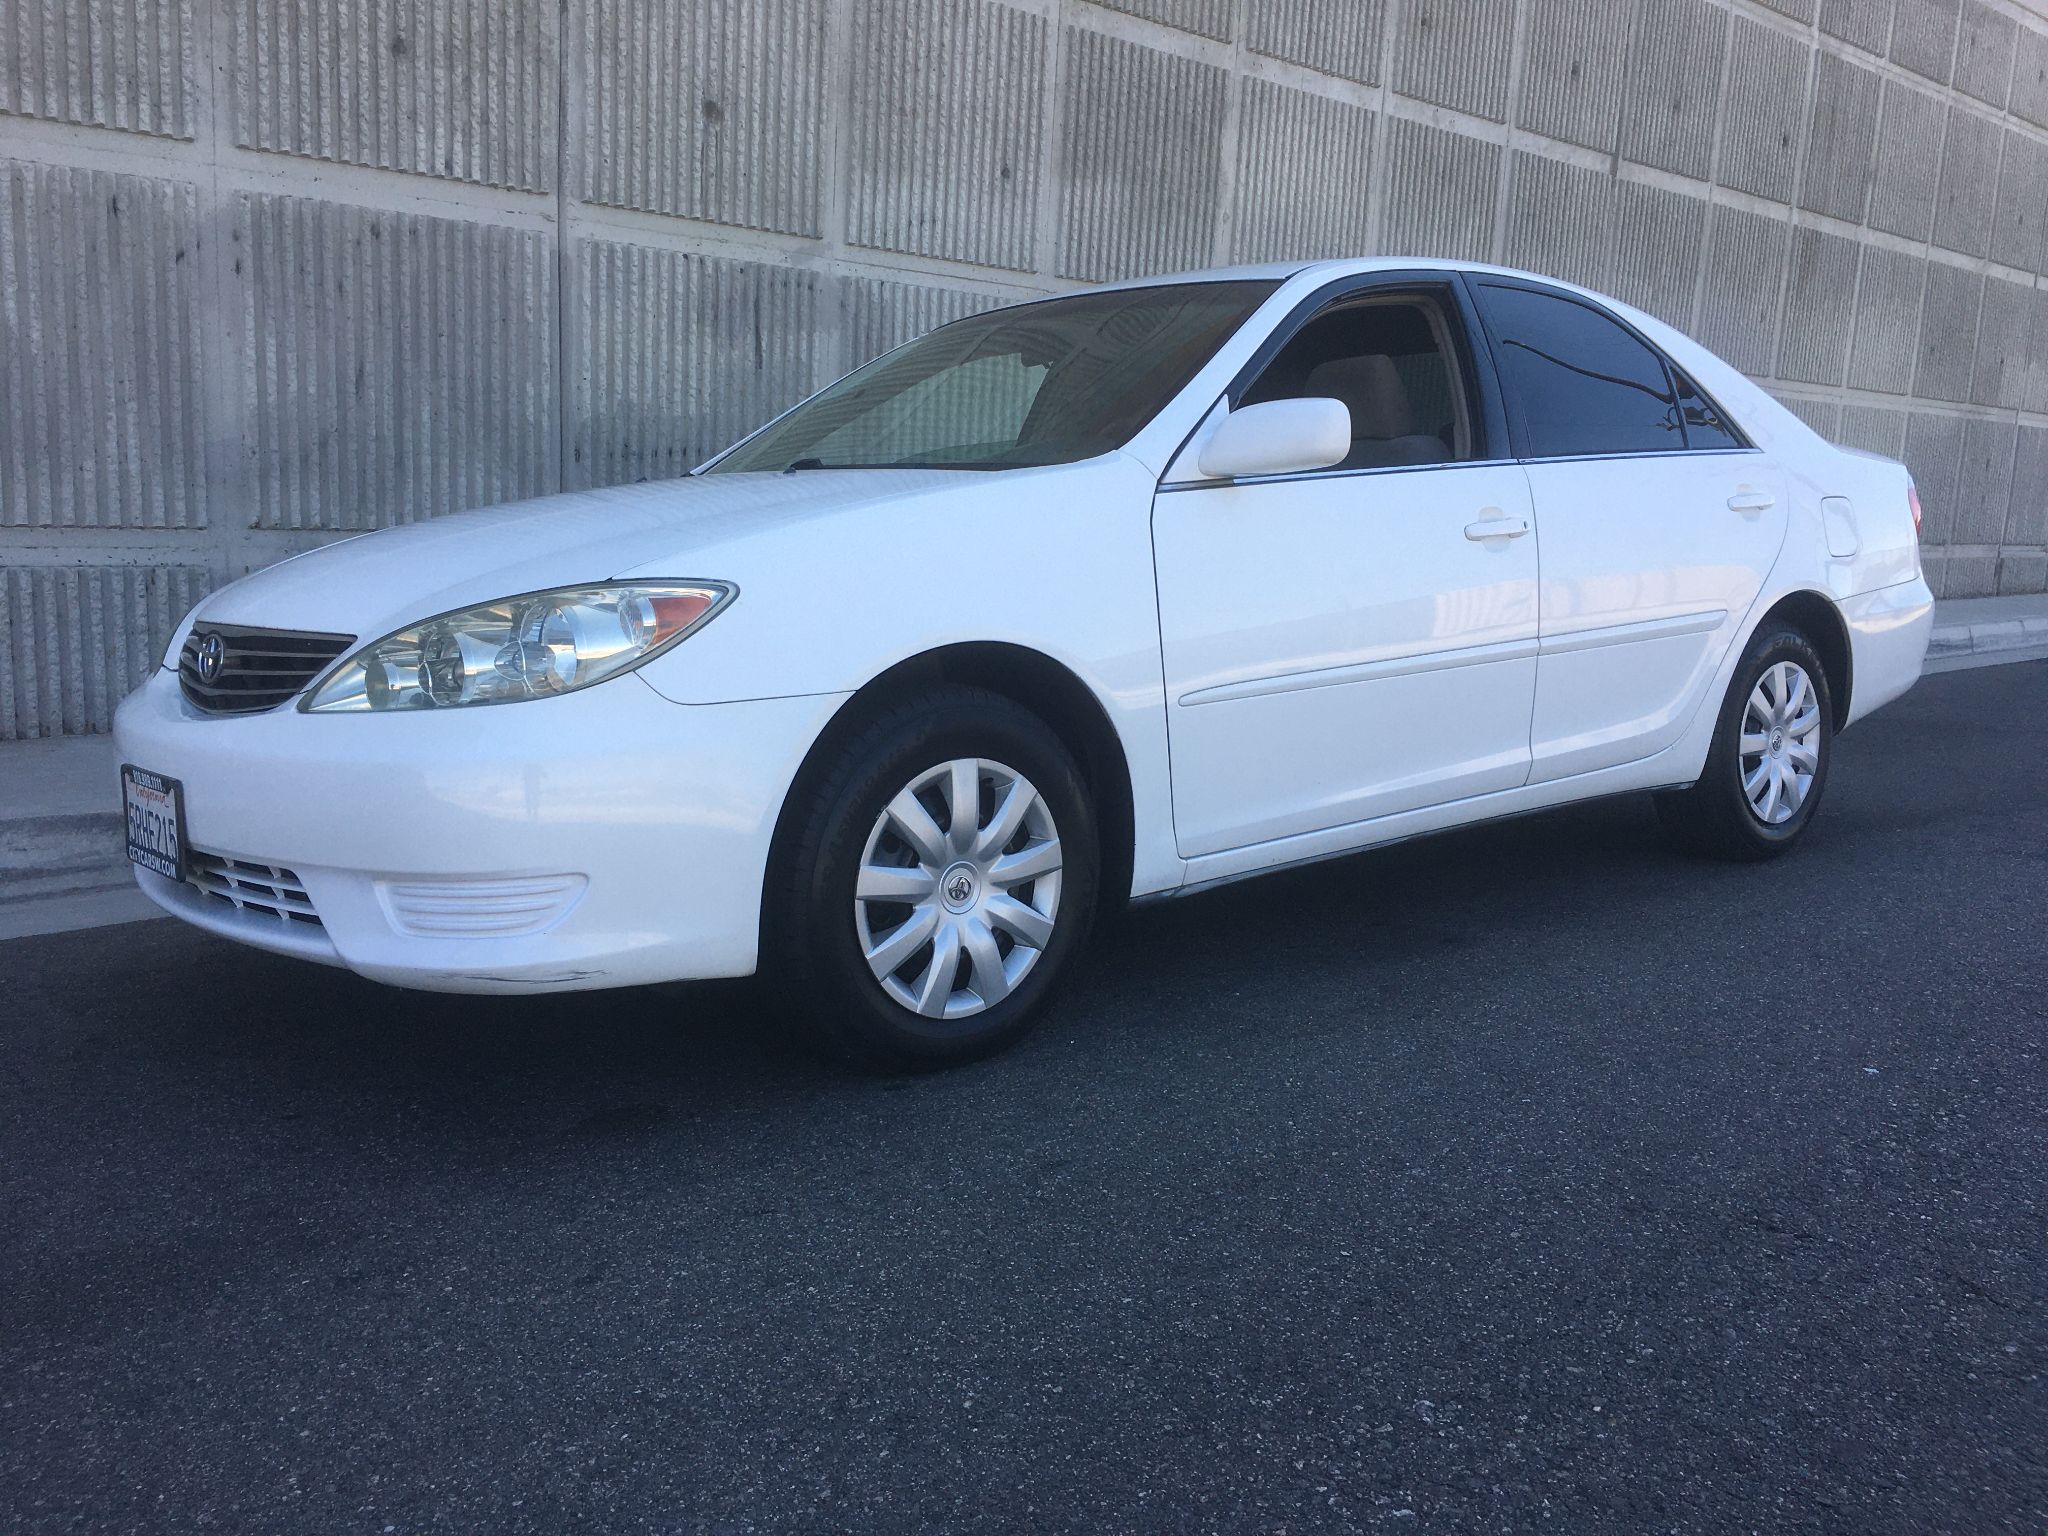 Used 2005 Toyota Camry LE at City Cars Warehouse Inc